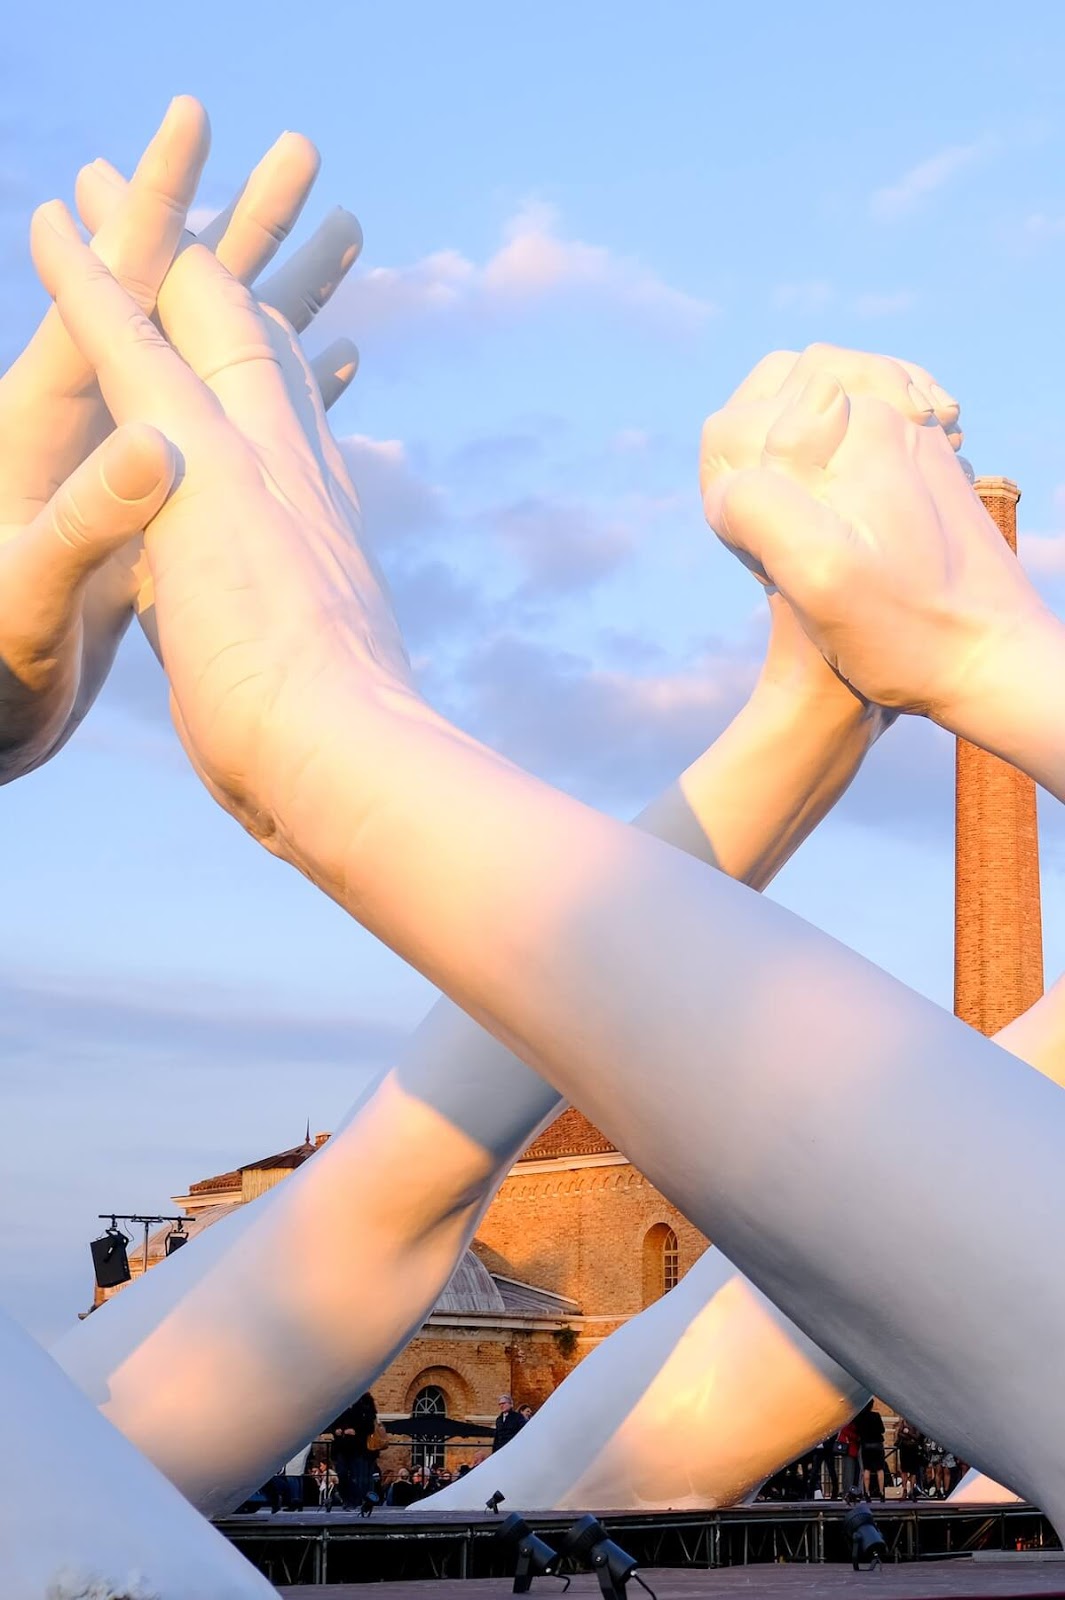 Monumental Installation Of Hands Creating A Bridge Of Unity In Venice